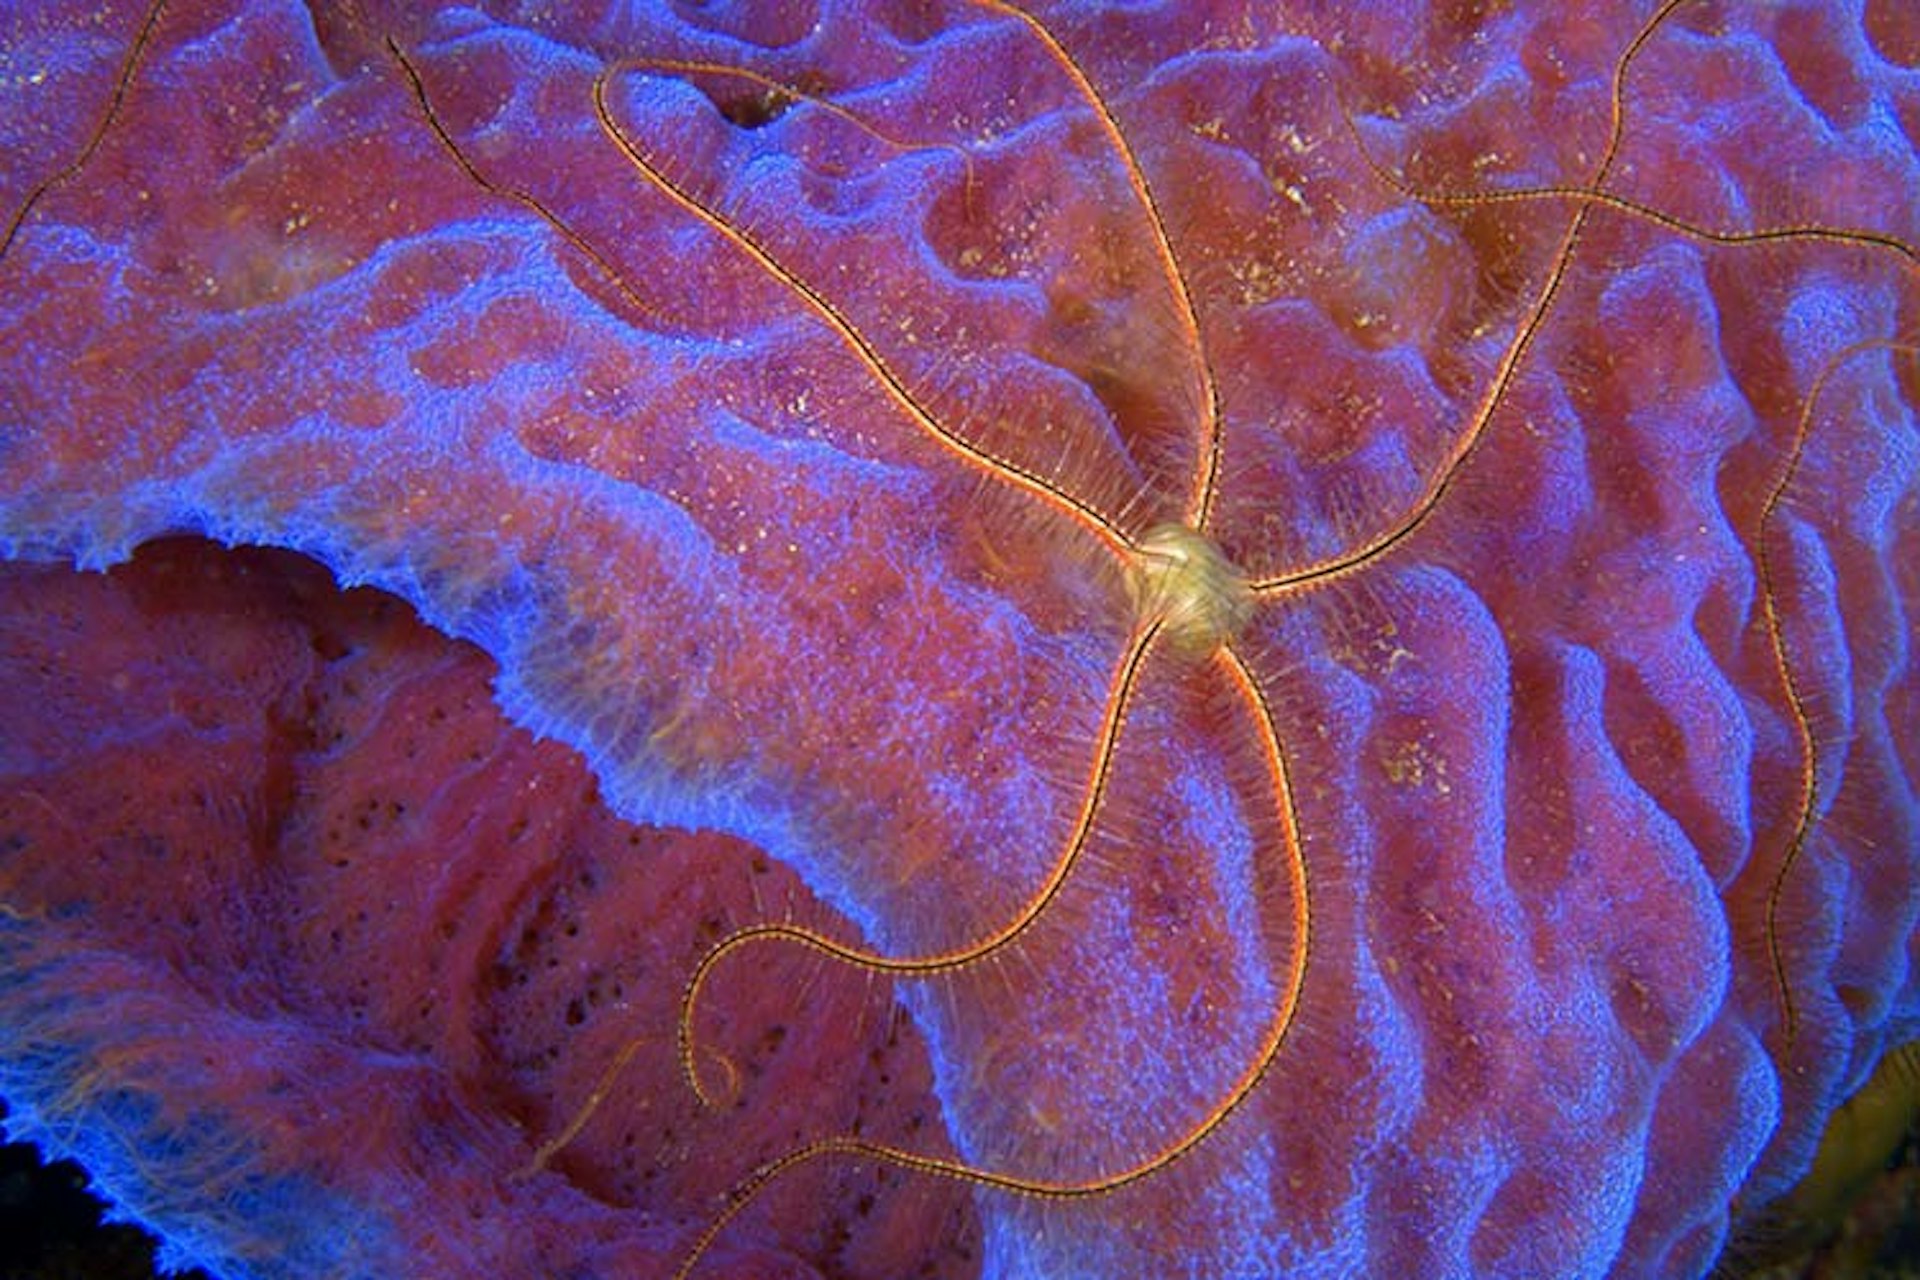 A delicate brittle star, an echinoderm related to a starfish, resting on a purple base sponge. Image courtesy of the Cayman Islands Department of Tourism / Lonely Planet.